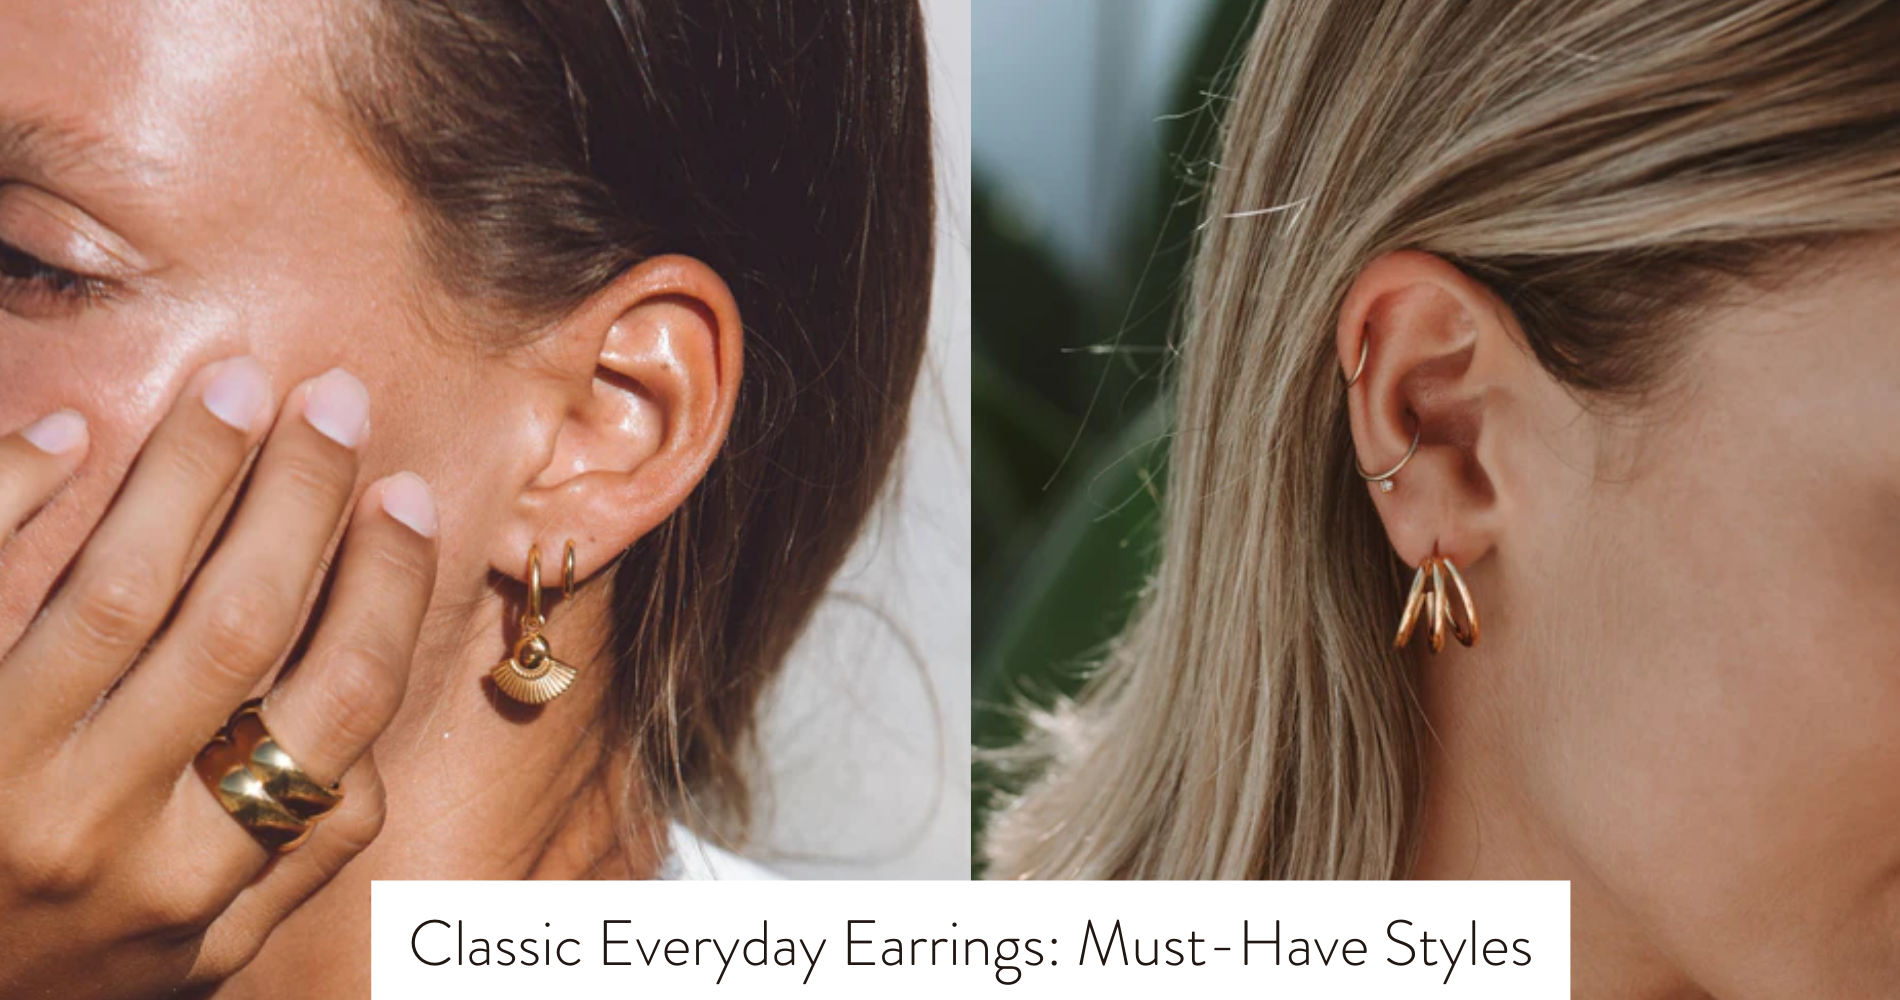 classic earrings for everyday